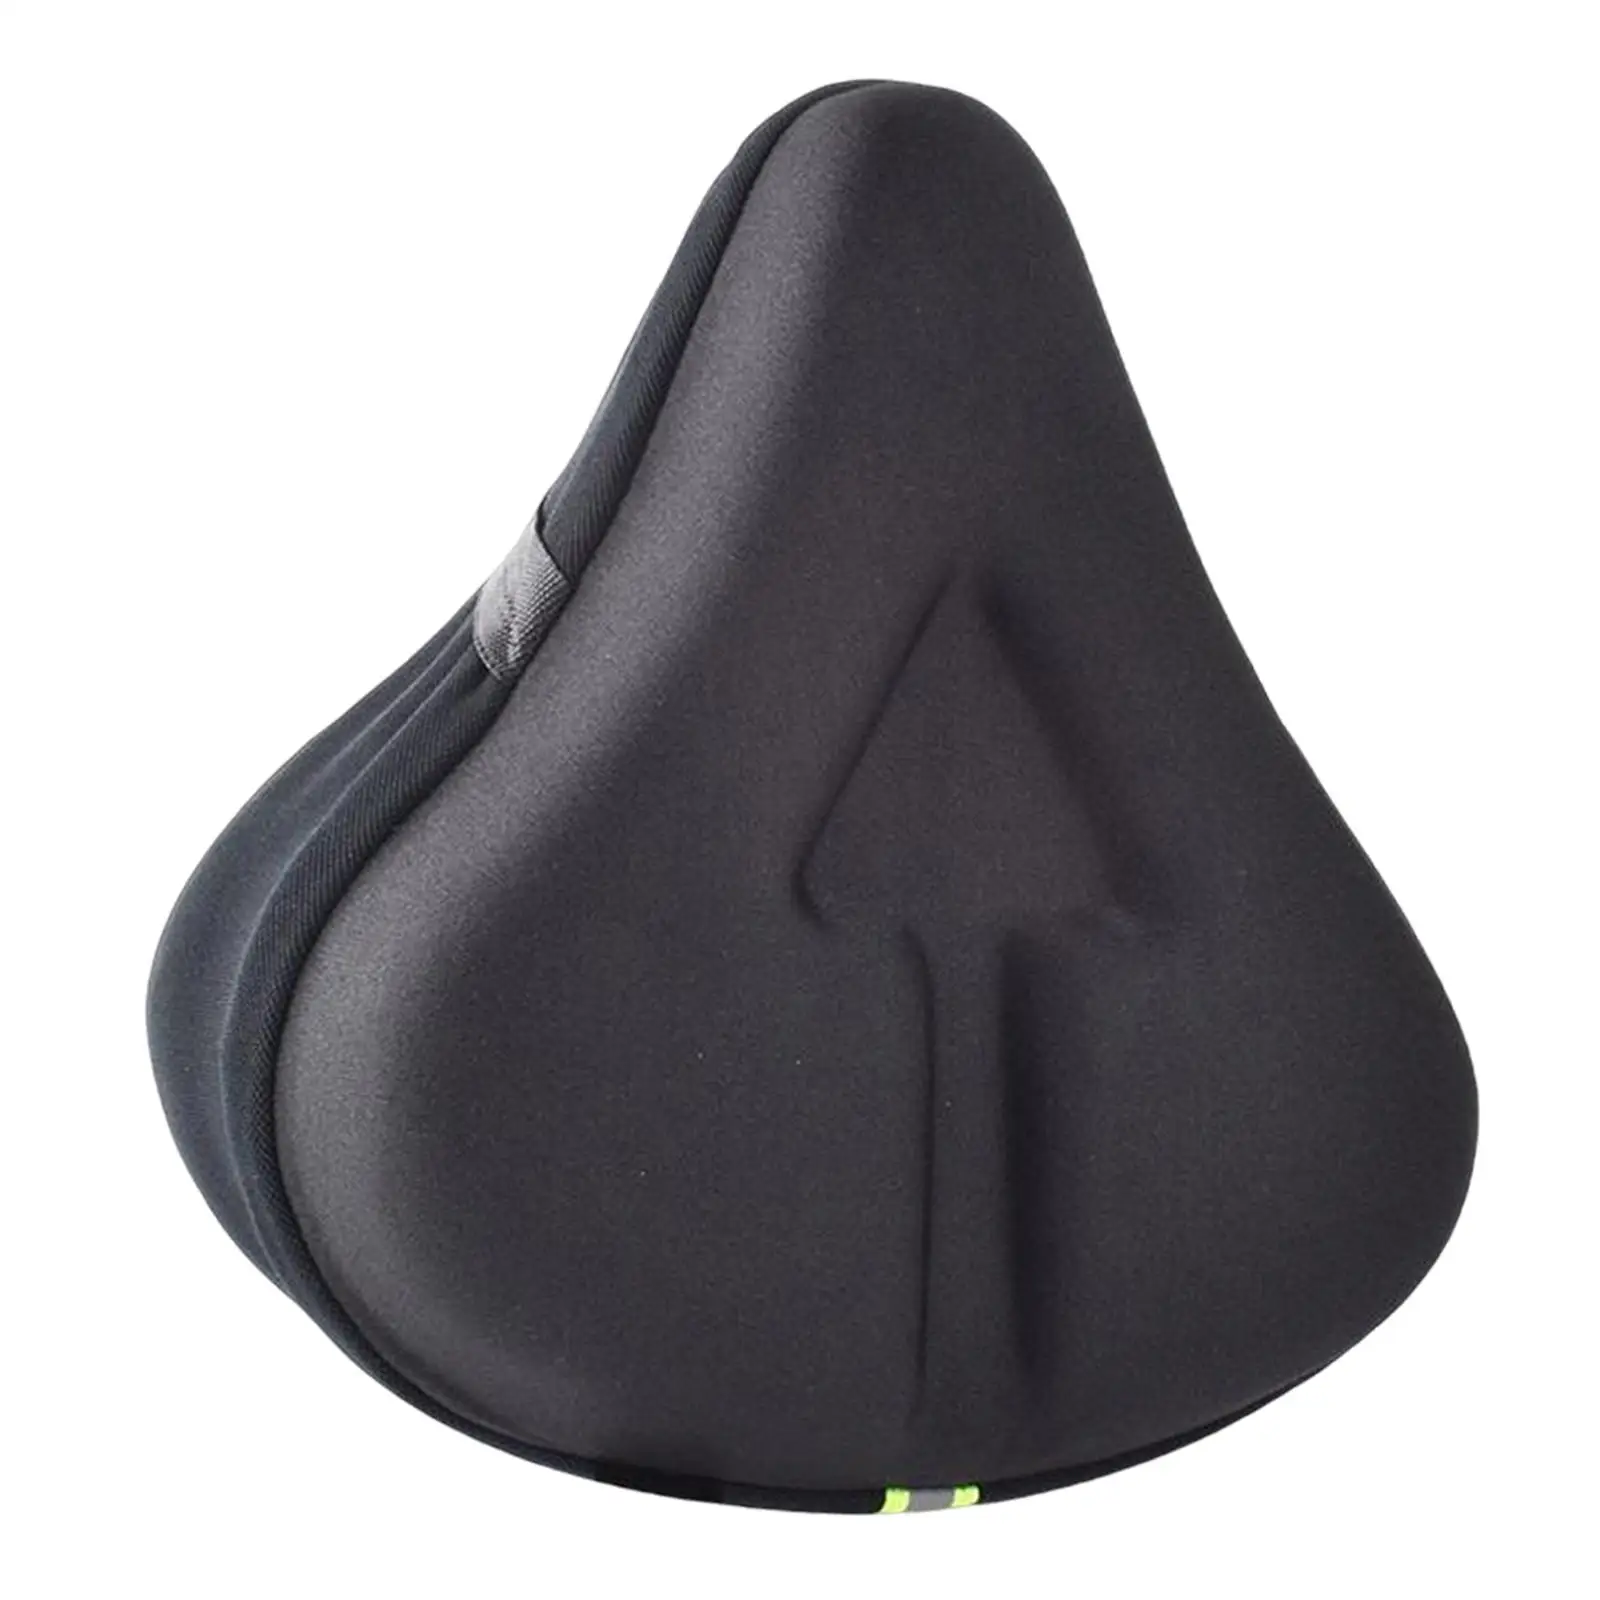 Wide Bike Seat , Bike Seat Cover, Comfortable Padded  Thicken for Cycling Exercise Bike